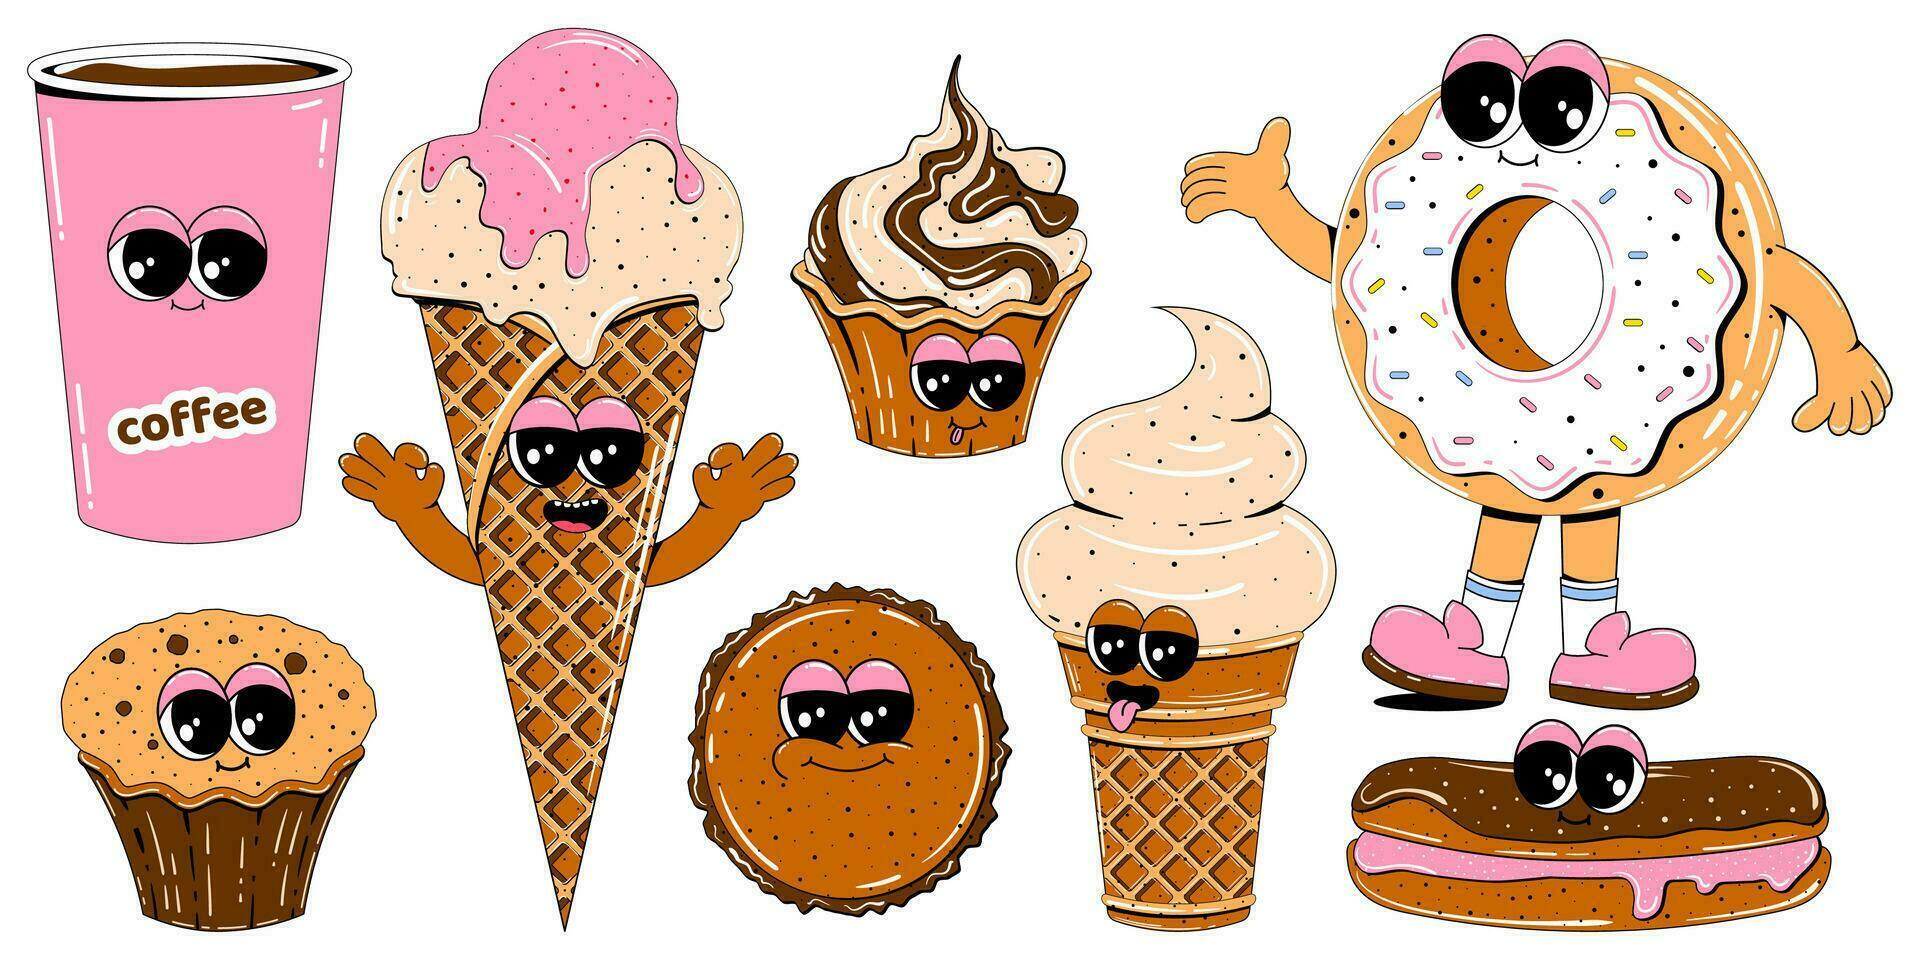 Cute sweets characters in retro cartoon style. Colorful set of mascots of donut, coffee, ice cream, cake, cupcake and other sweets. Vector illustration on isolated white background.